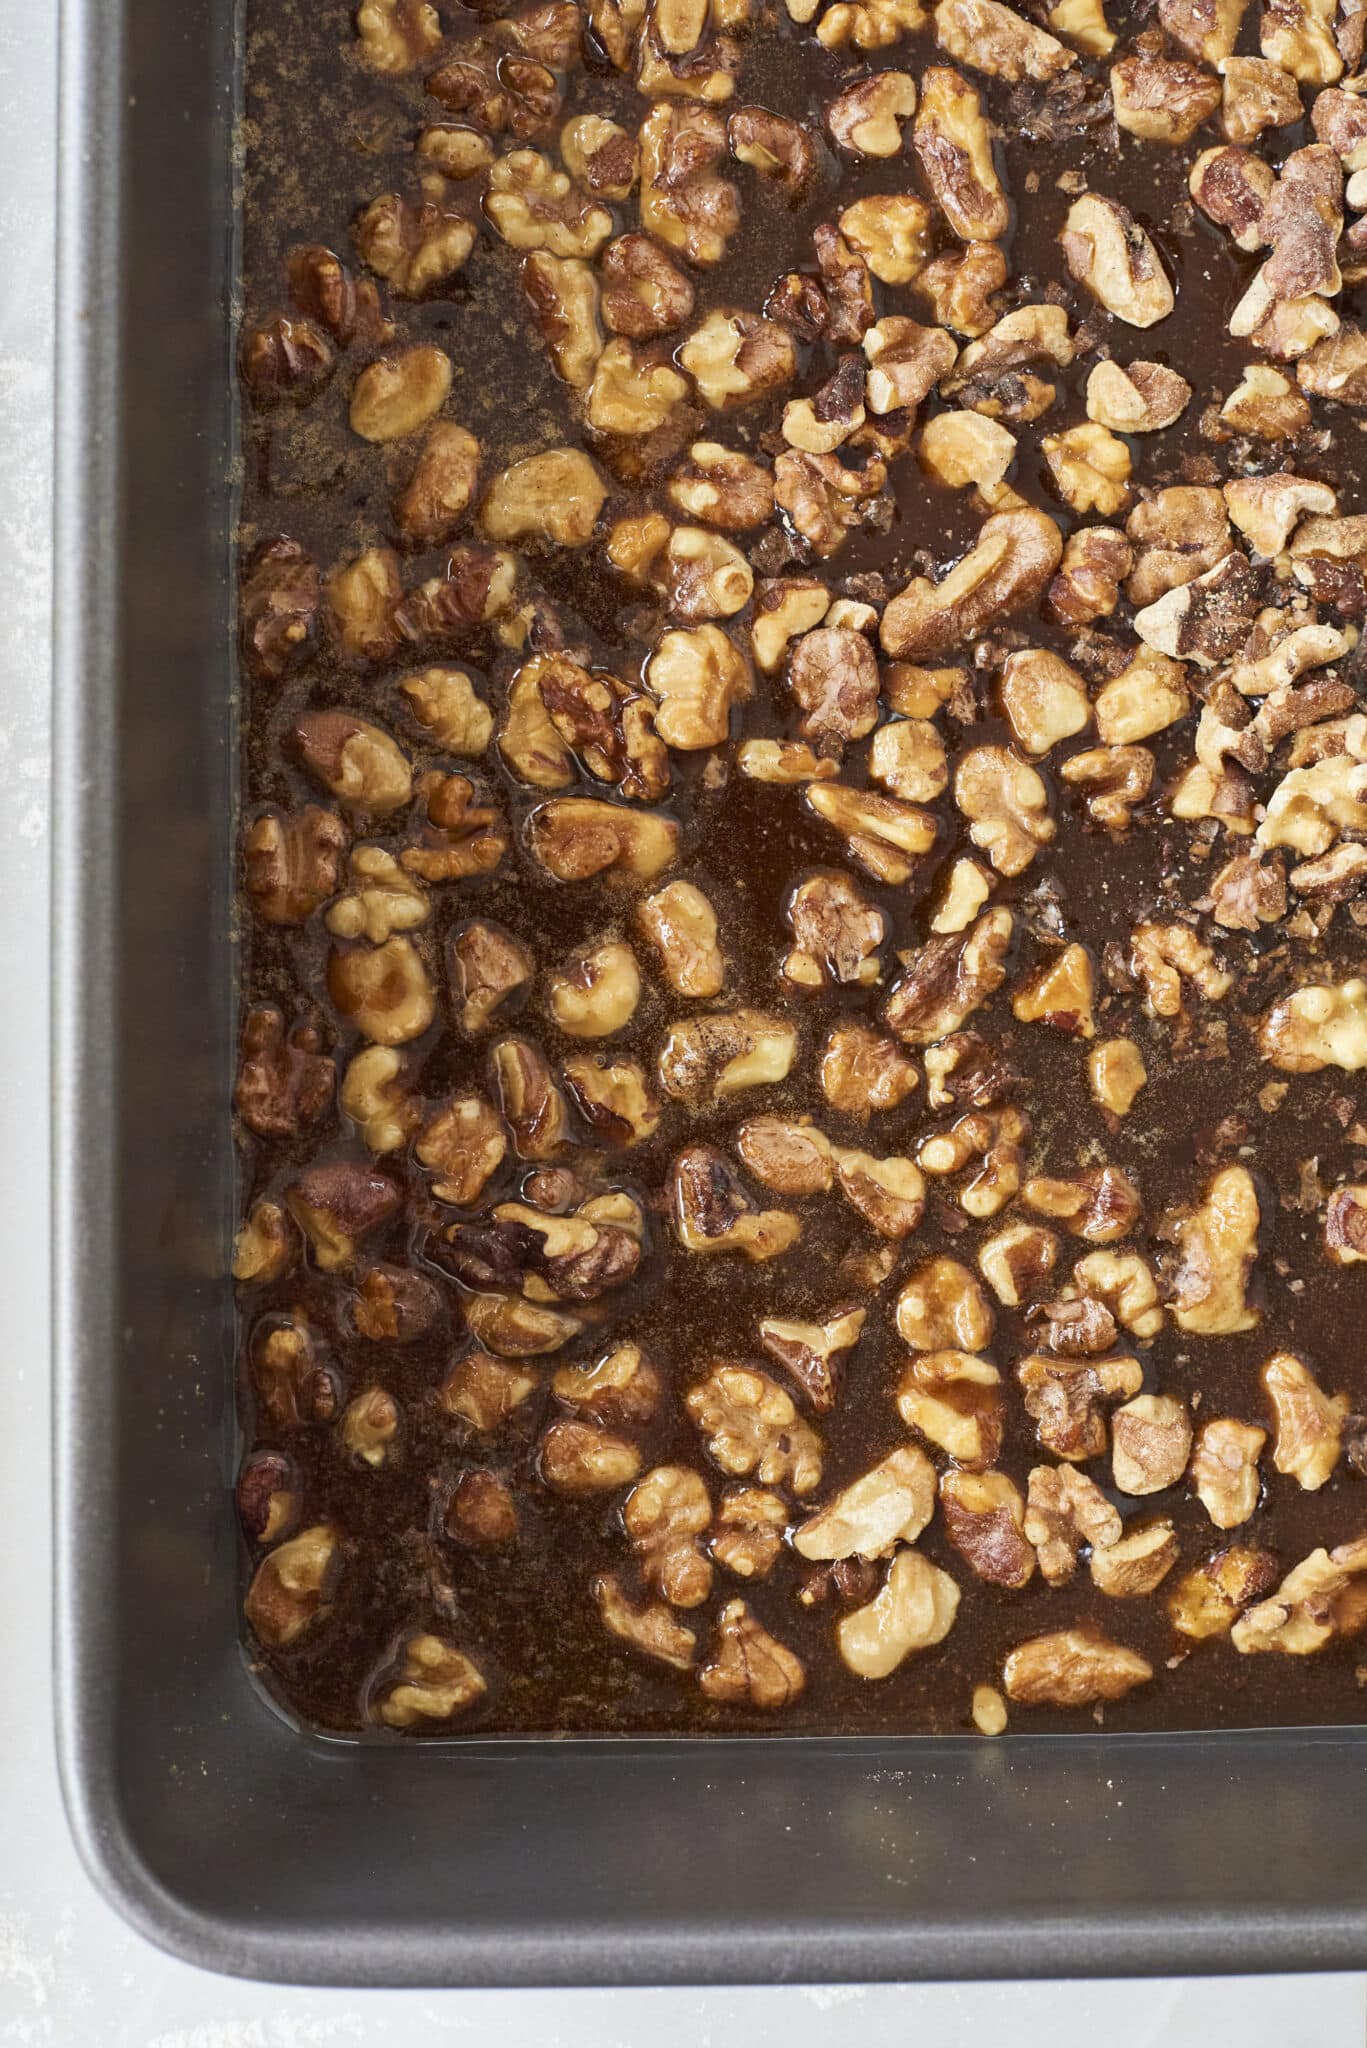 The rich caramel is in deep amber color and sitting in the prepared pan with toasted walnuts scattered on top. 